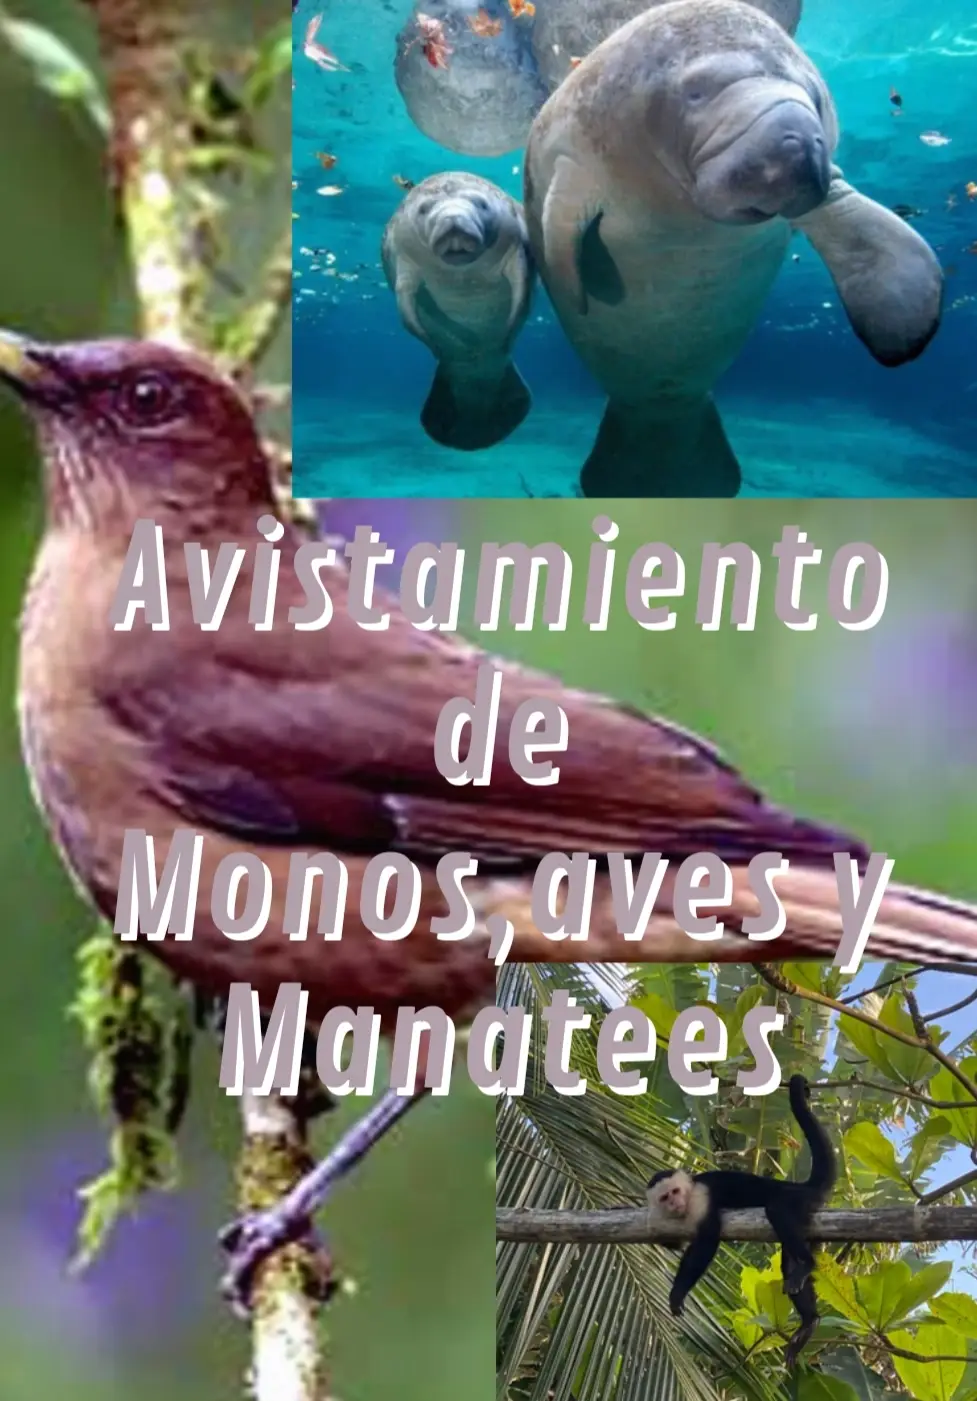 Observation in the Caribbean of Manatees, Turtles, Monkeys, Birds and Beach Cleaning.